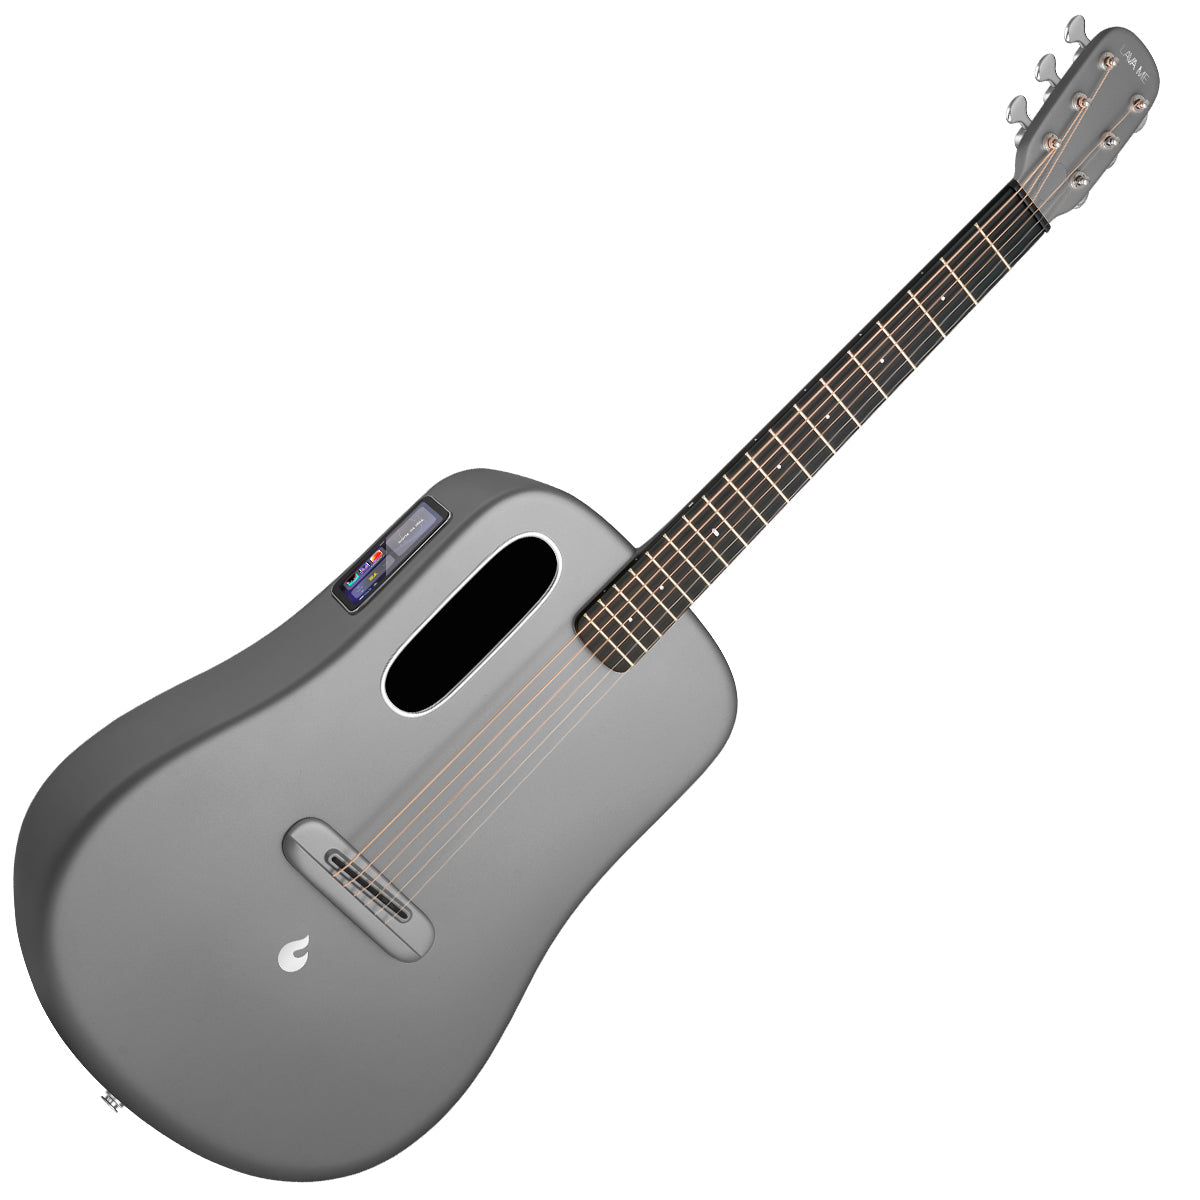 LAVA ME4 Carbon 36" with Space Bag ~ Space Grey, Acoustic Guitar for sale at Richards Guitars.